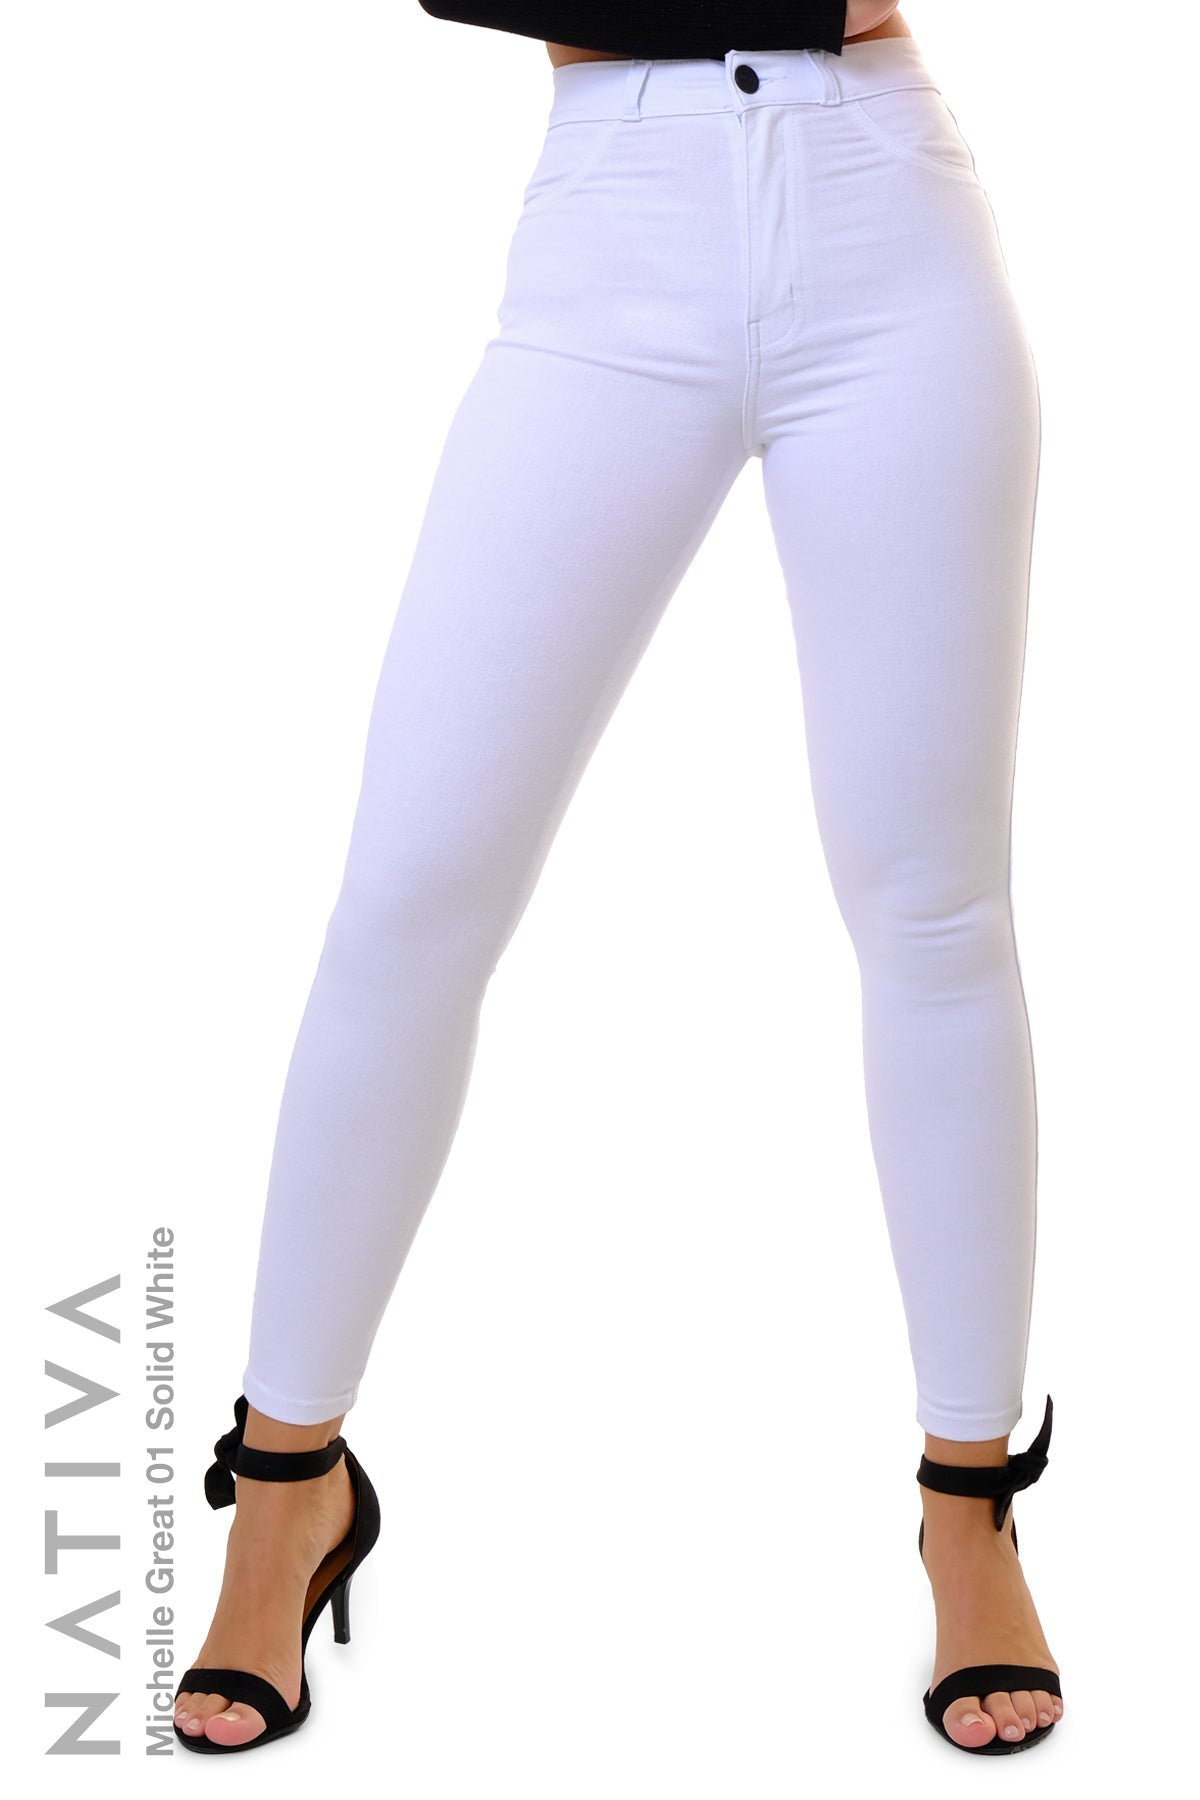 Women Solid White Super Stretch Jeggings